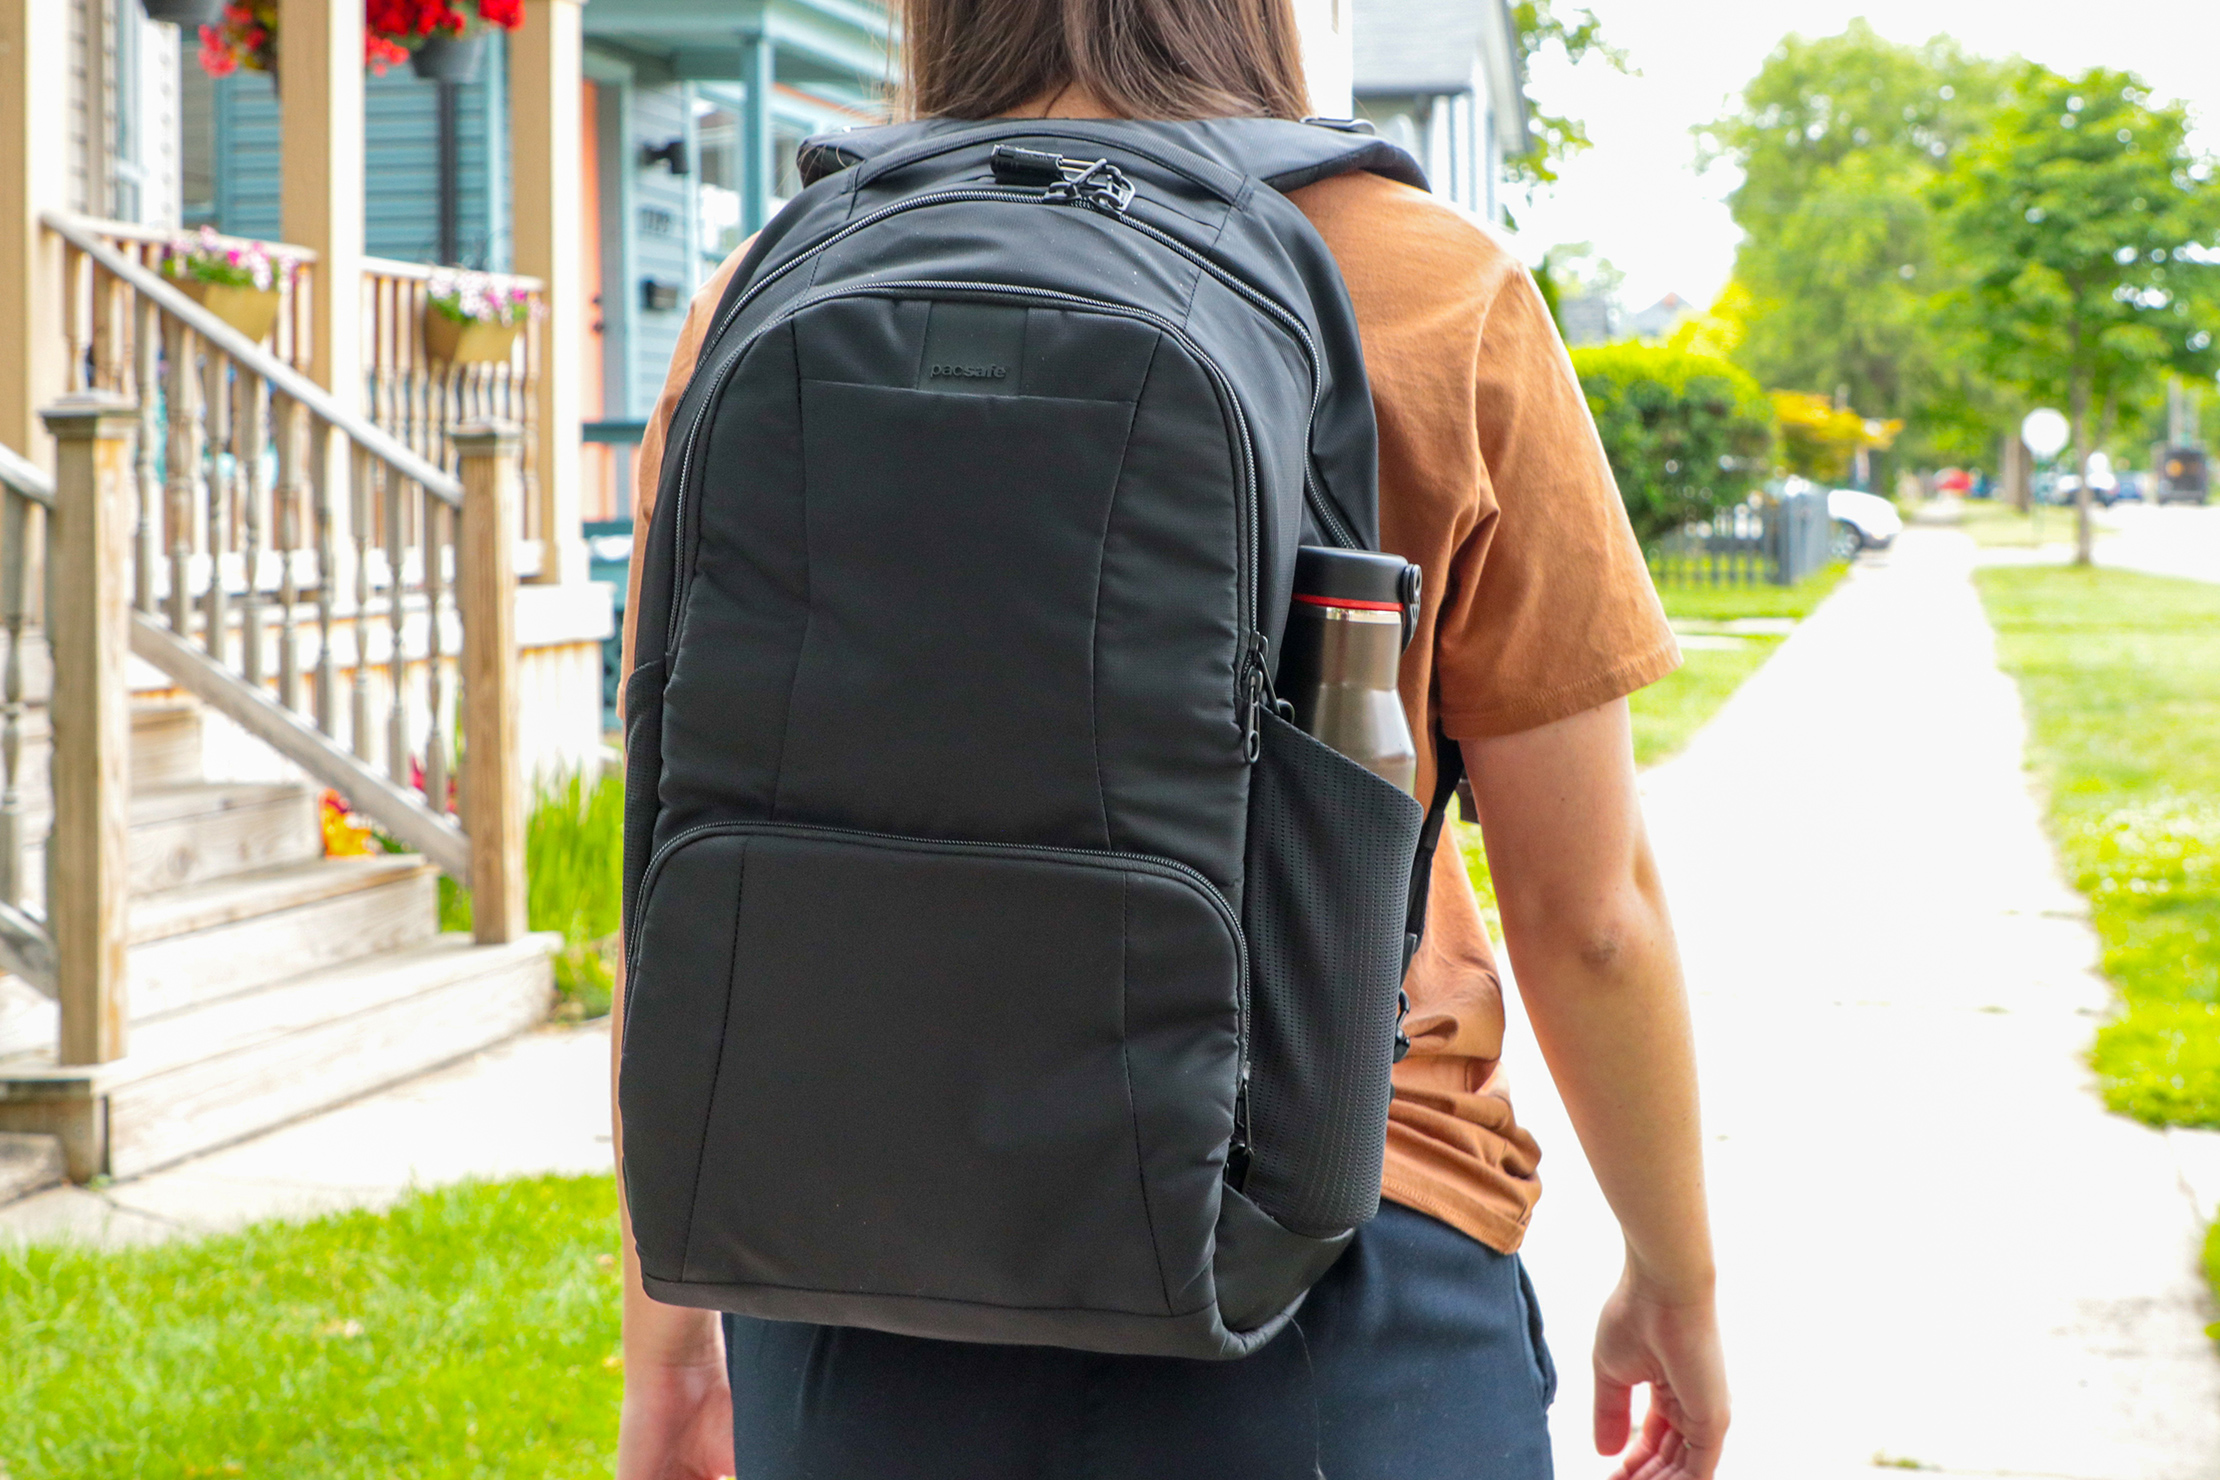 Pacsafe Metrosafe LS450 Anti-Theft Backpack Review | Pack Hacker